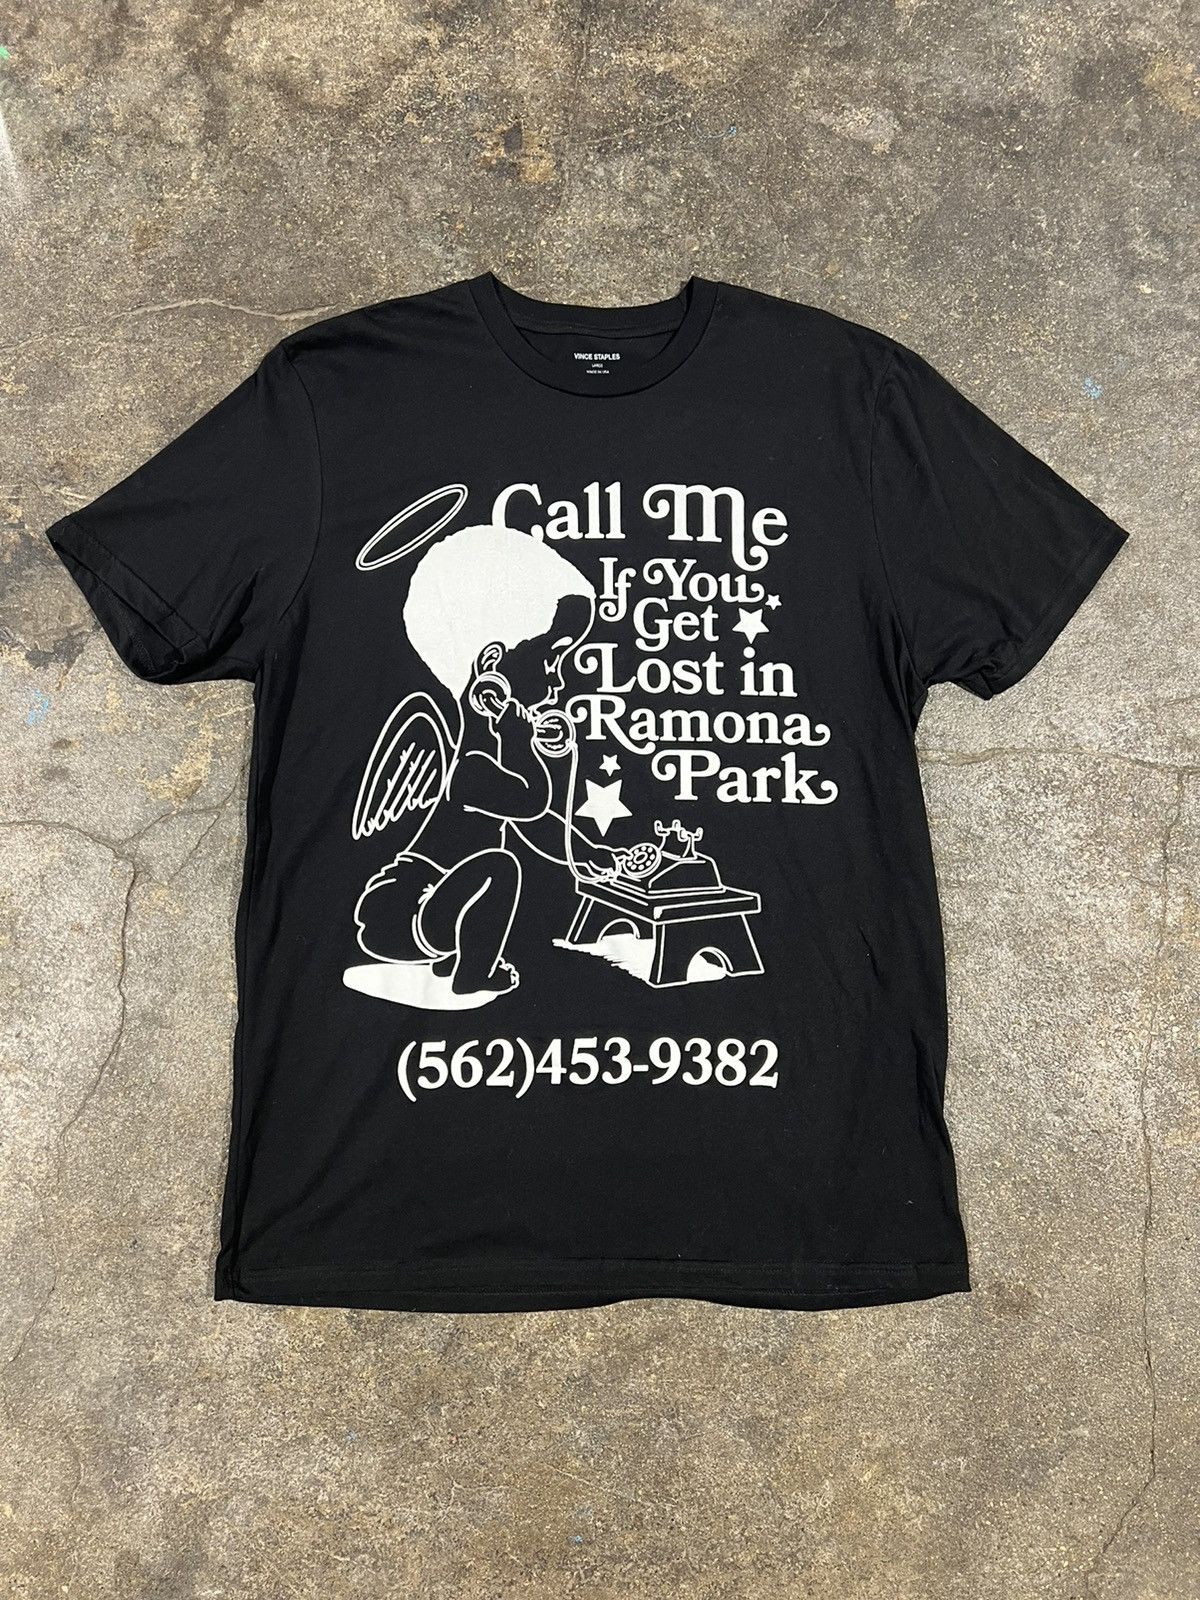 Vince Staples Merch Vince Staples Call Me If You Get Lost In Ramona Park Tee Grailed